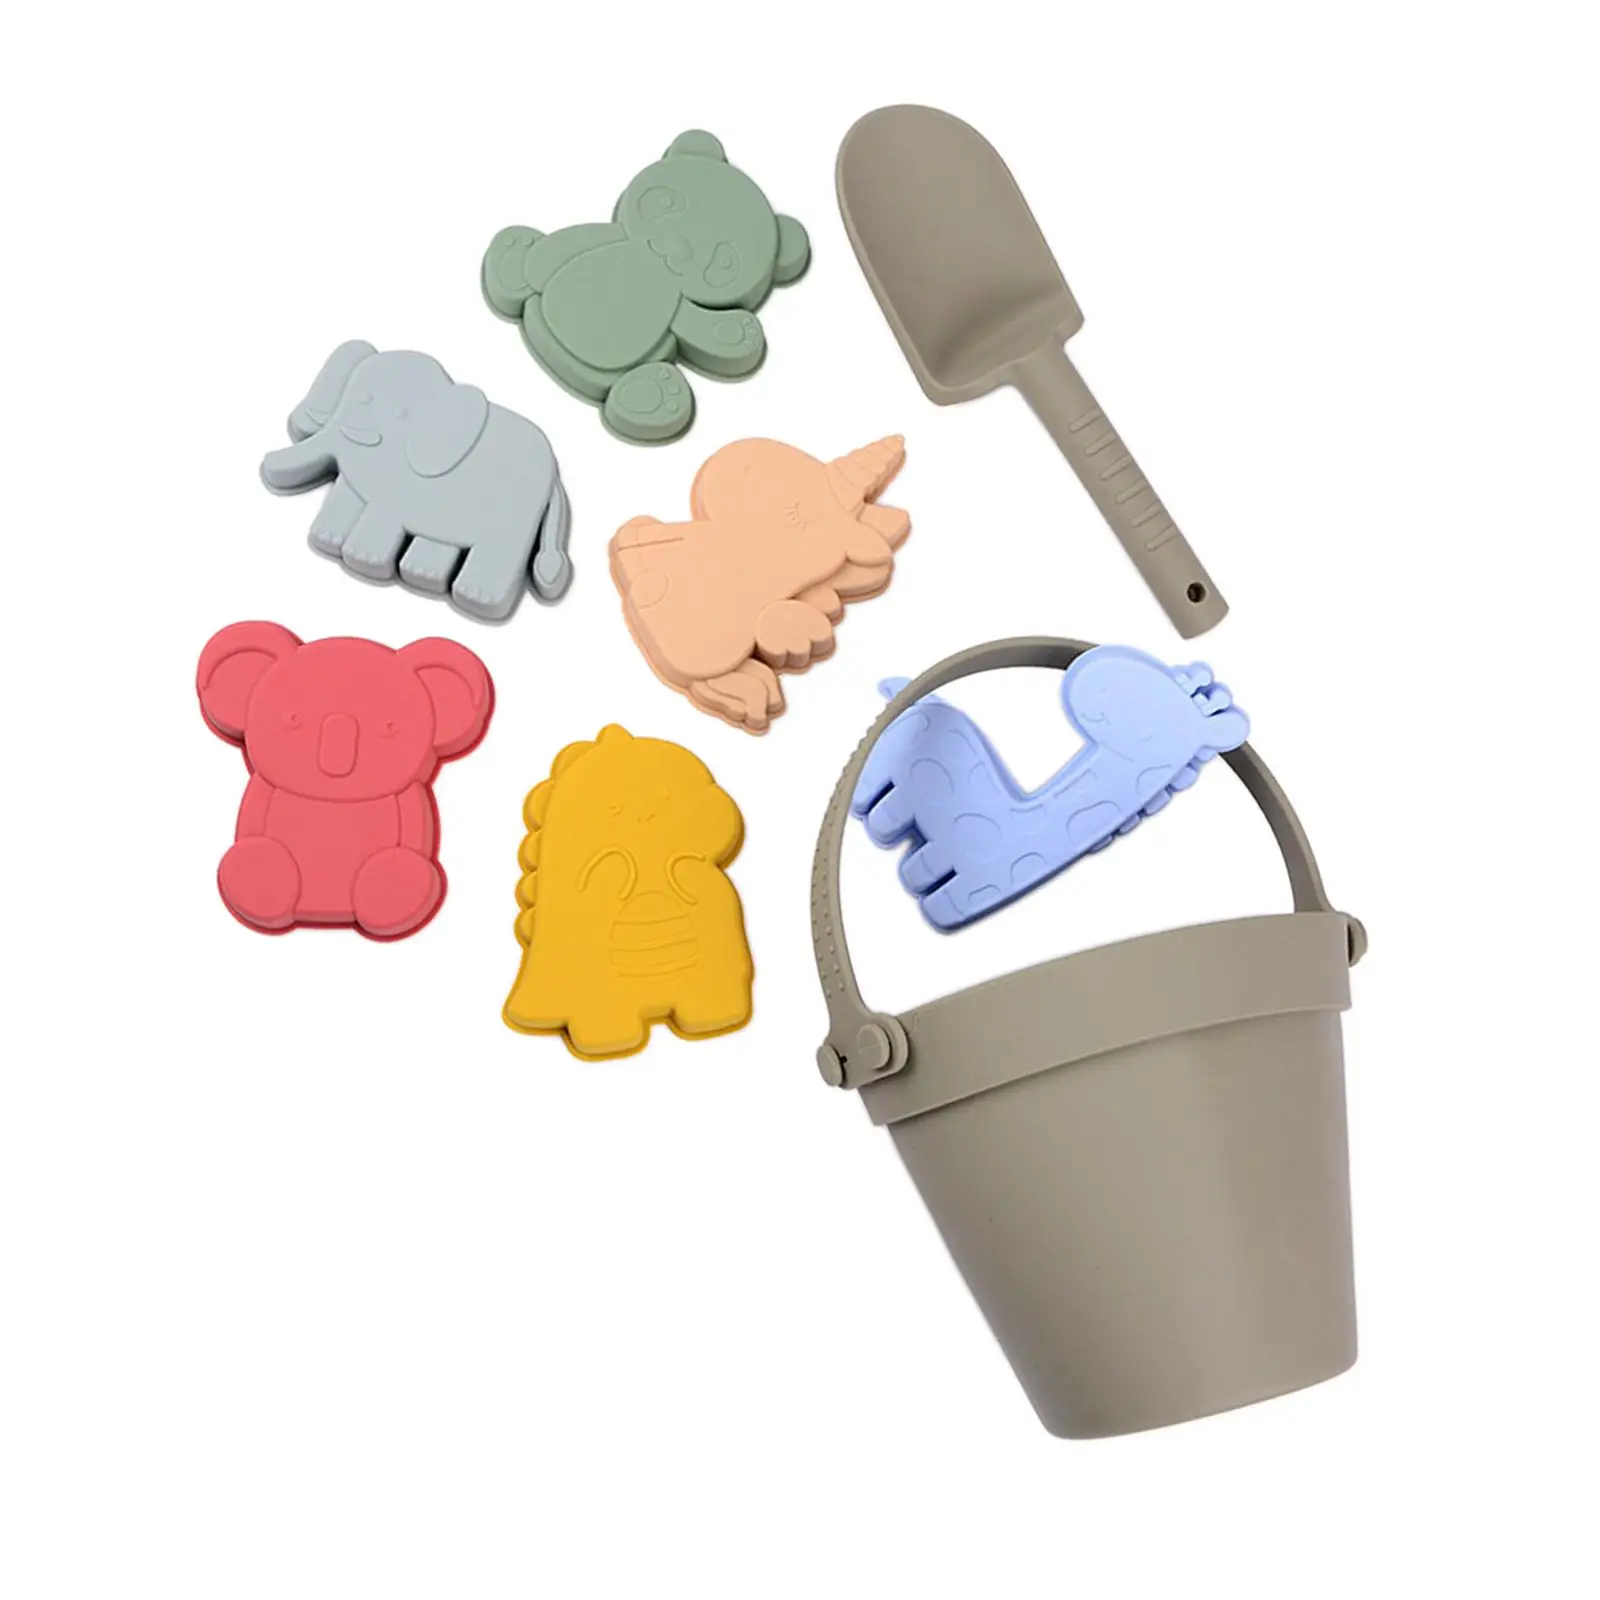 8 Pieces Beach Bucket and Spade Set for Toddlers Beach Toy Travel Beach Toy Kits for Travel Playground Beach Seaside Boys Girls